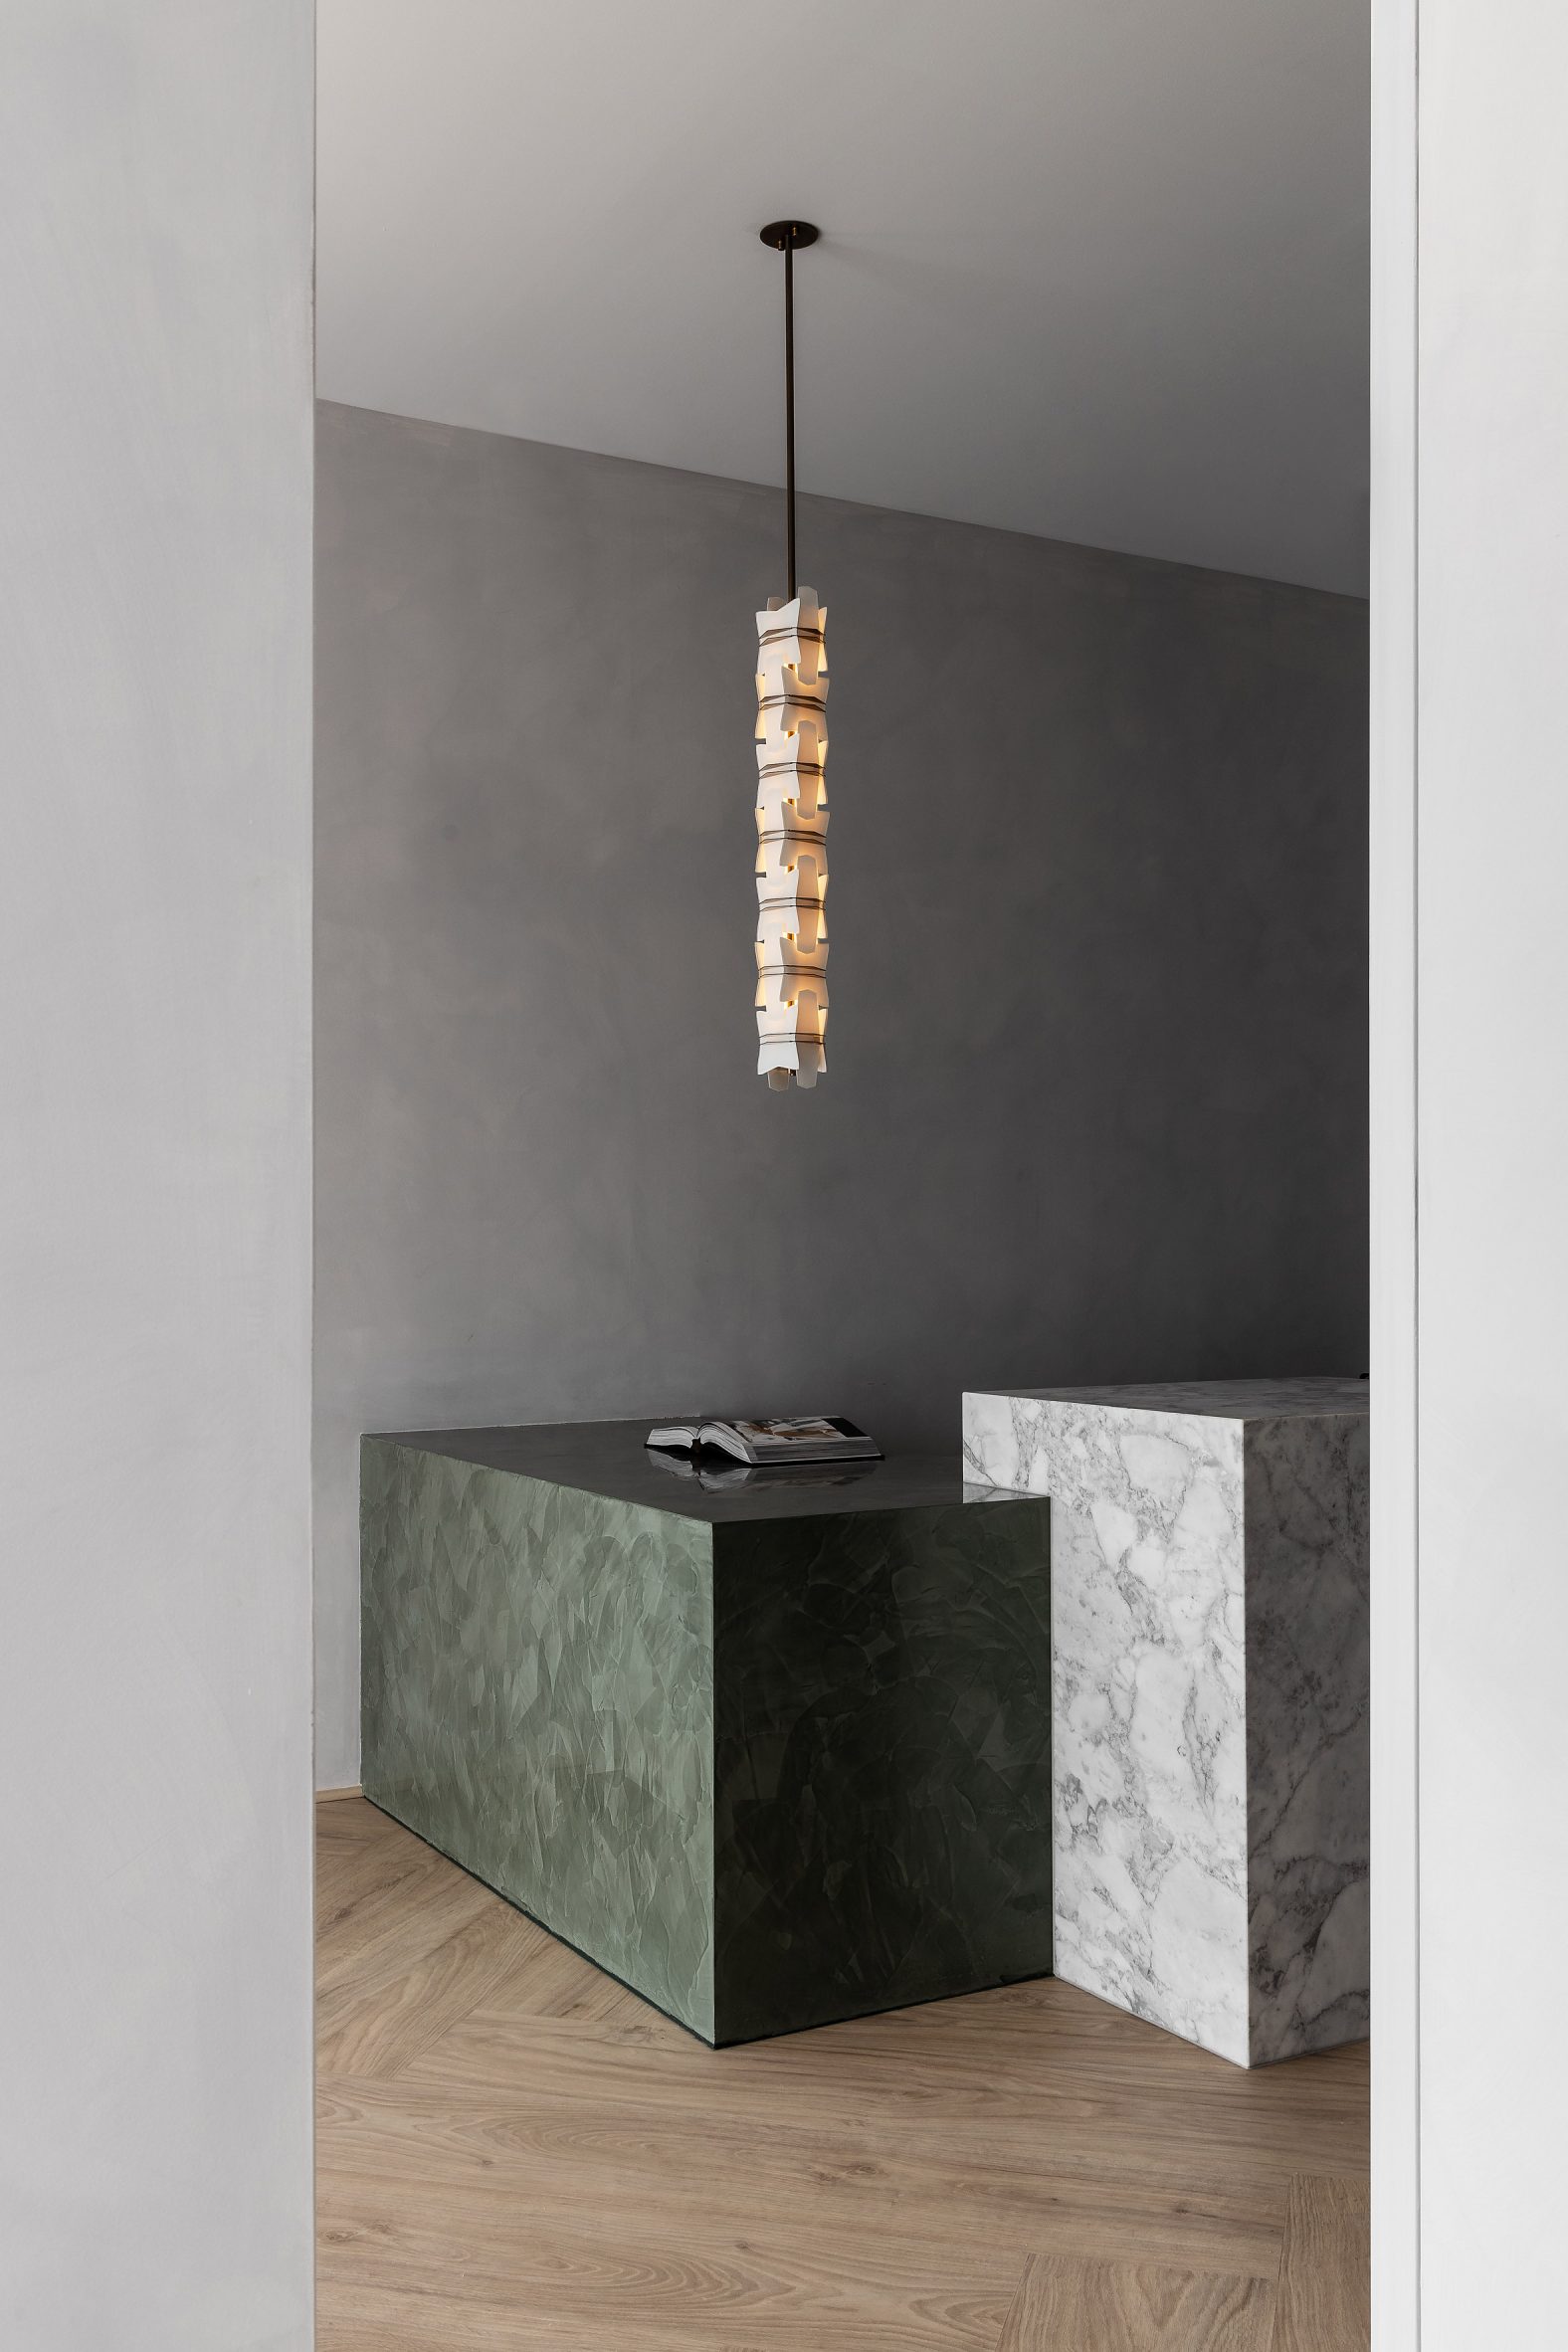 Marble reception desk in Youth Lab 3.0 clinic interior design by Nickolas Gurtler